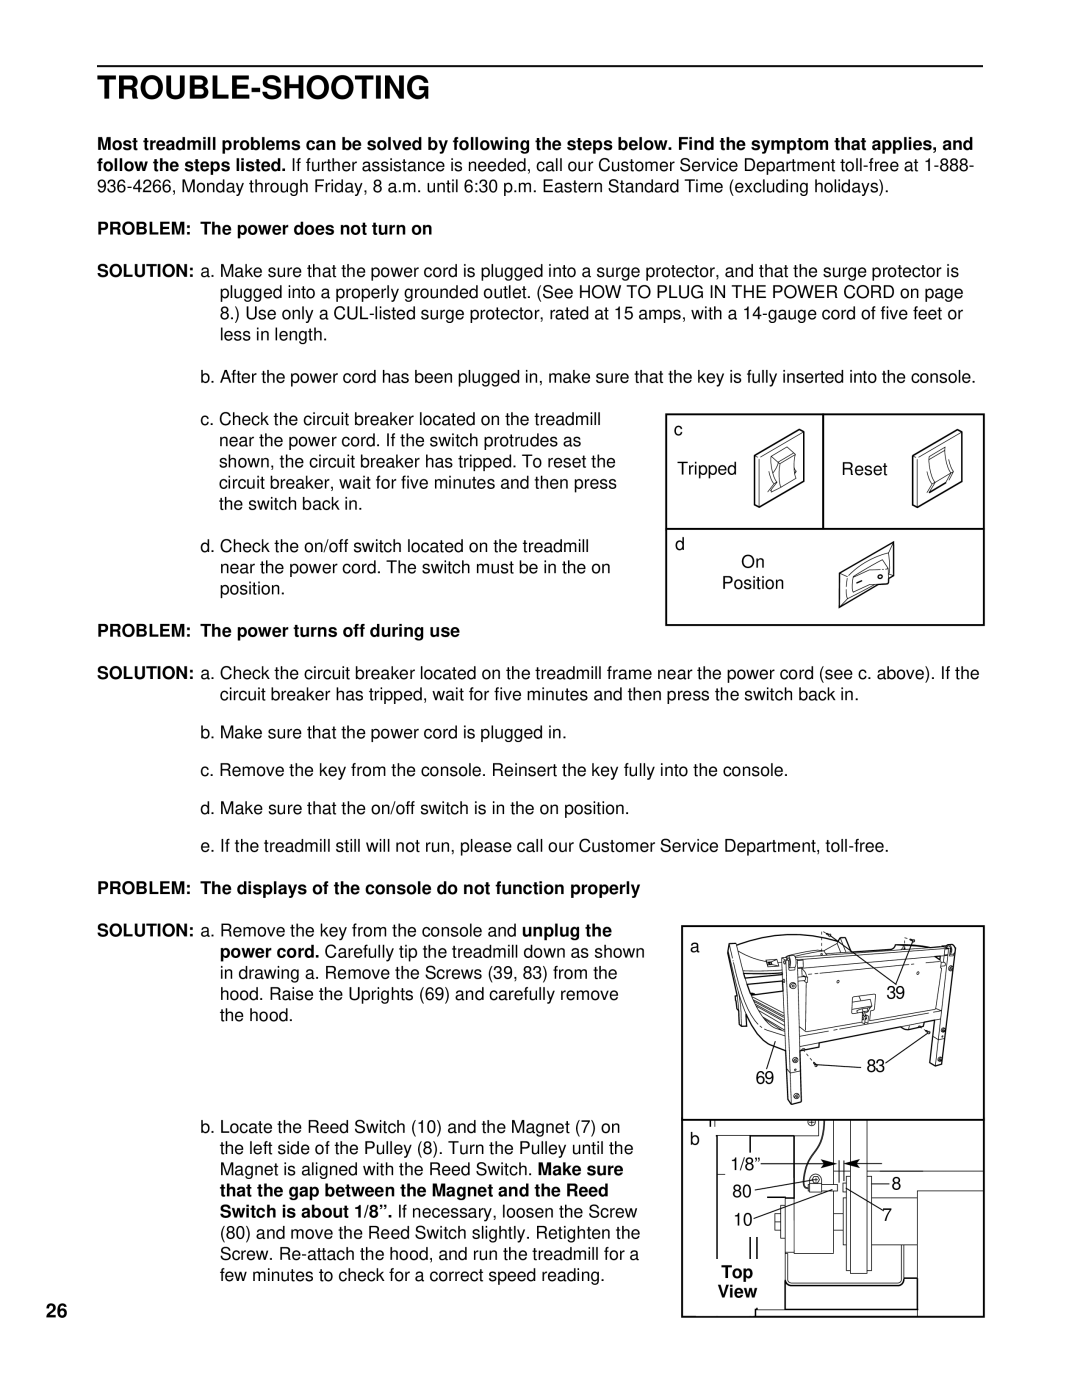 NordicTrack NCTL11990 user manual Trouble-Shooting, Solution 